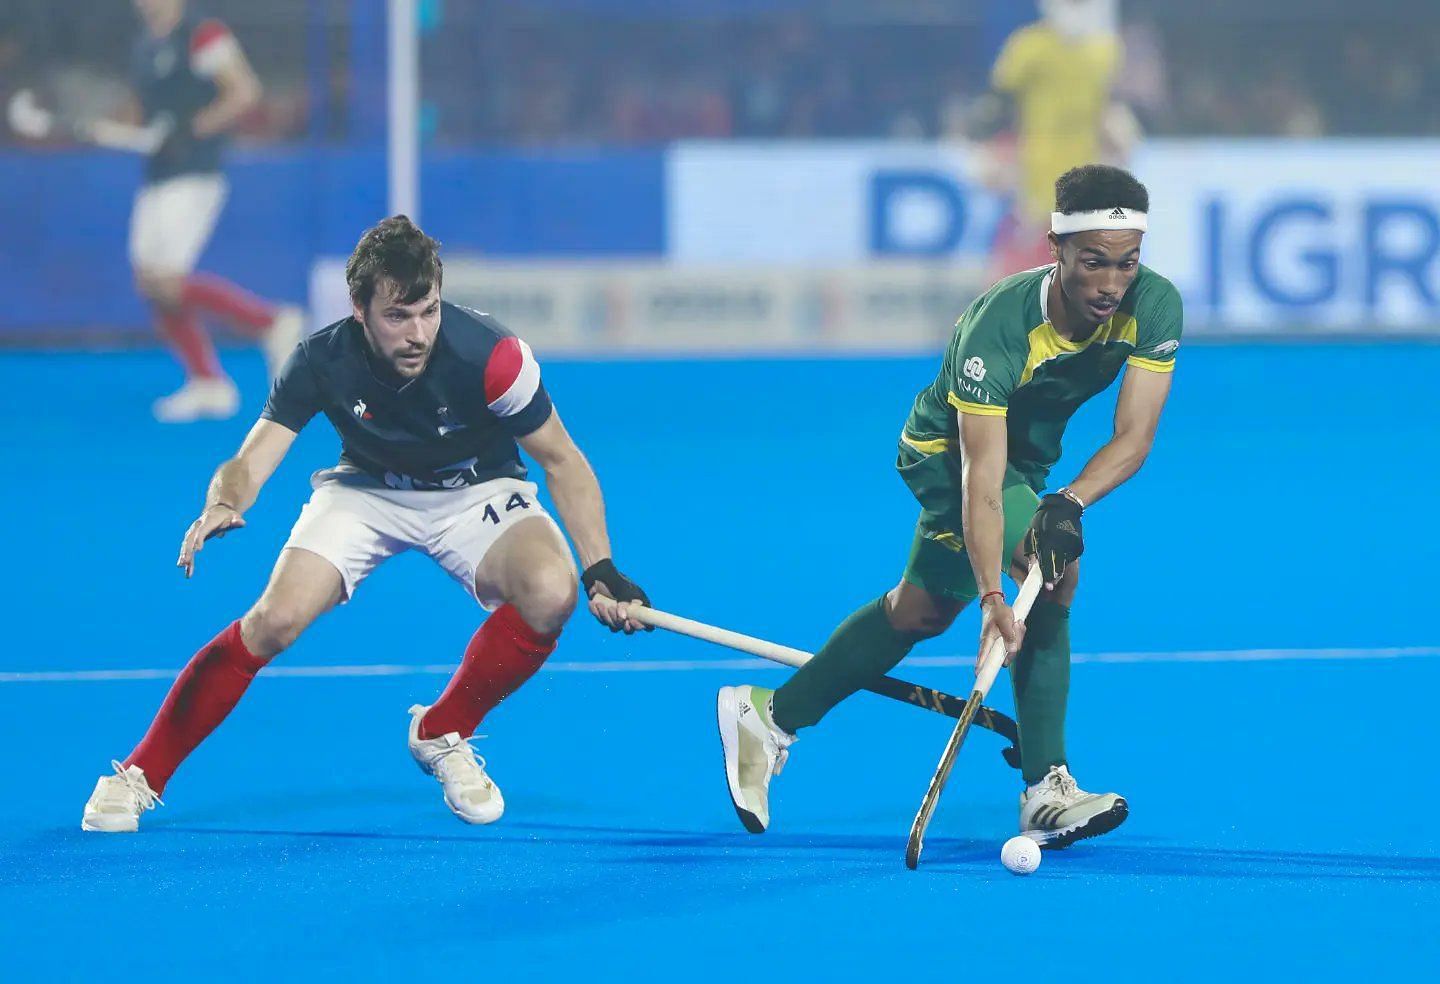 France and South Africa teams in action in an earlier match (Image Courtesy: Twitter/Hockey India)